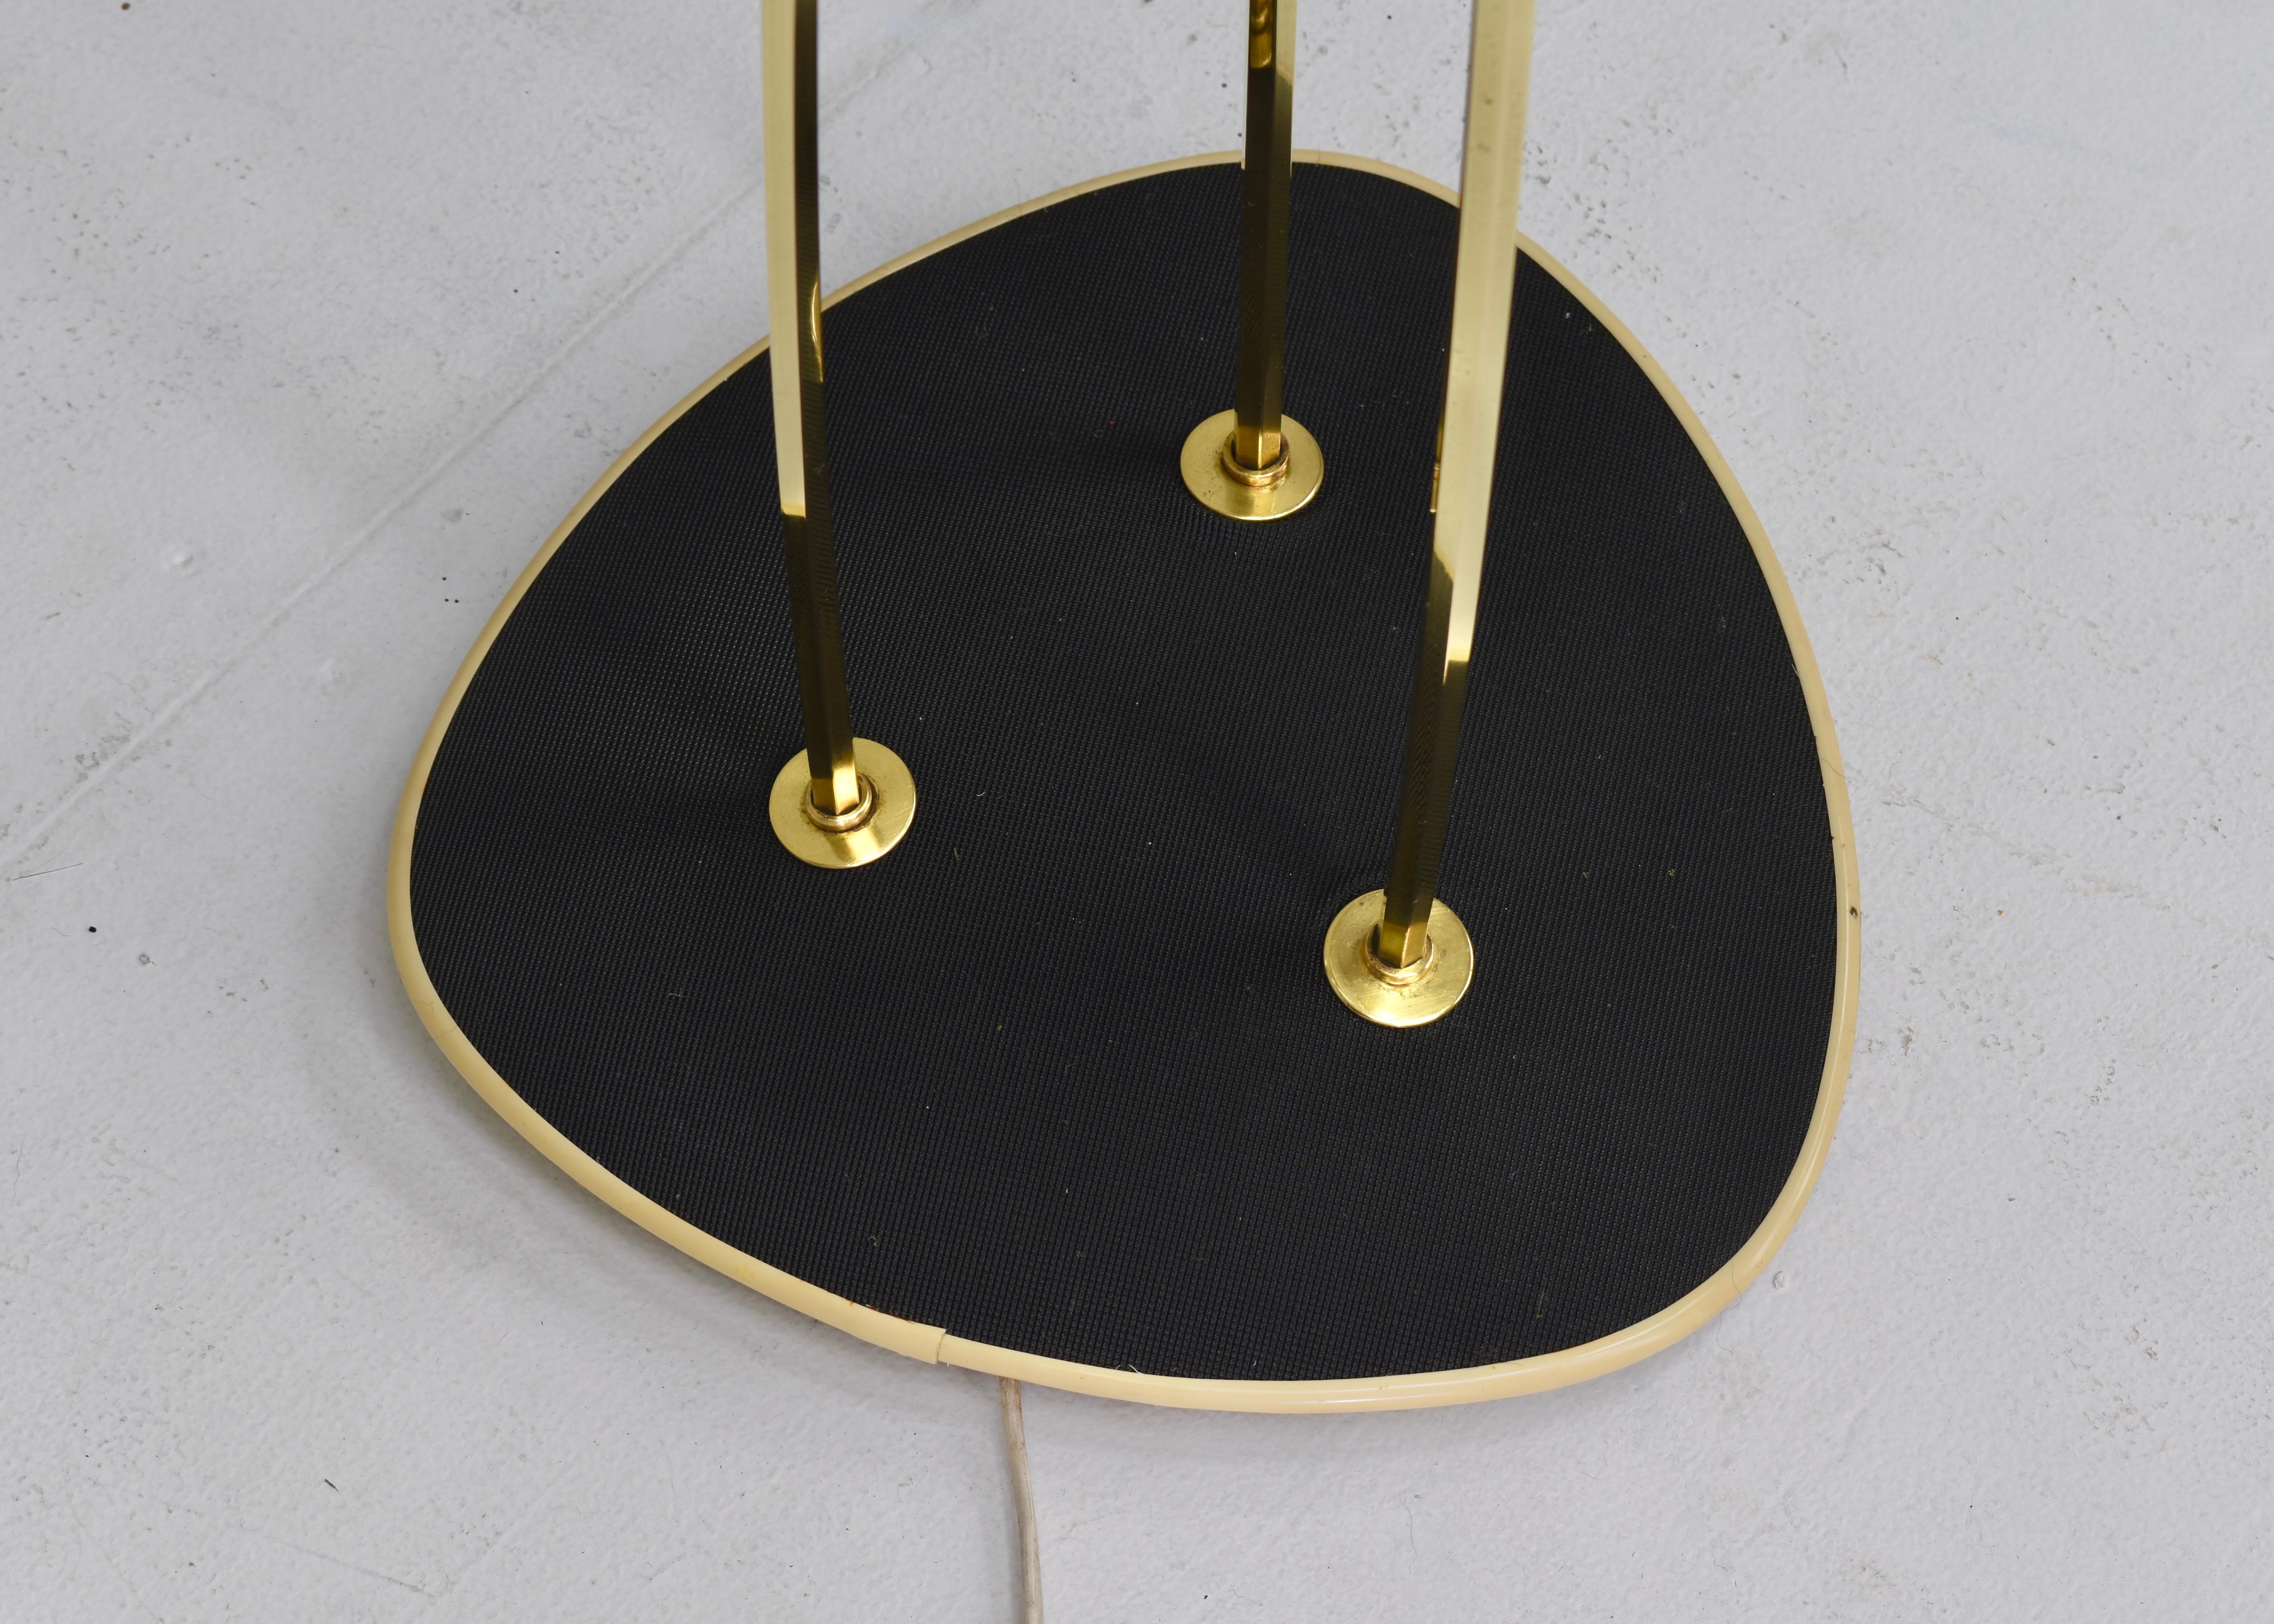 Sophisticated and Elegant Brass Triennale Floor Lamp Italy, circa 1950 For Sale 12